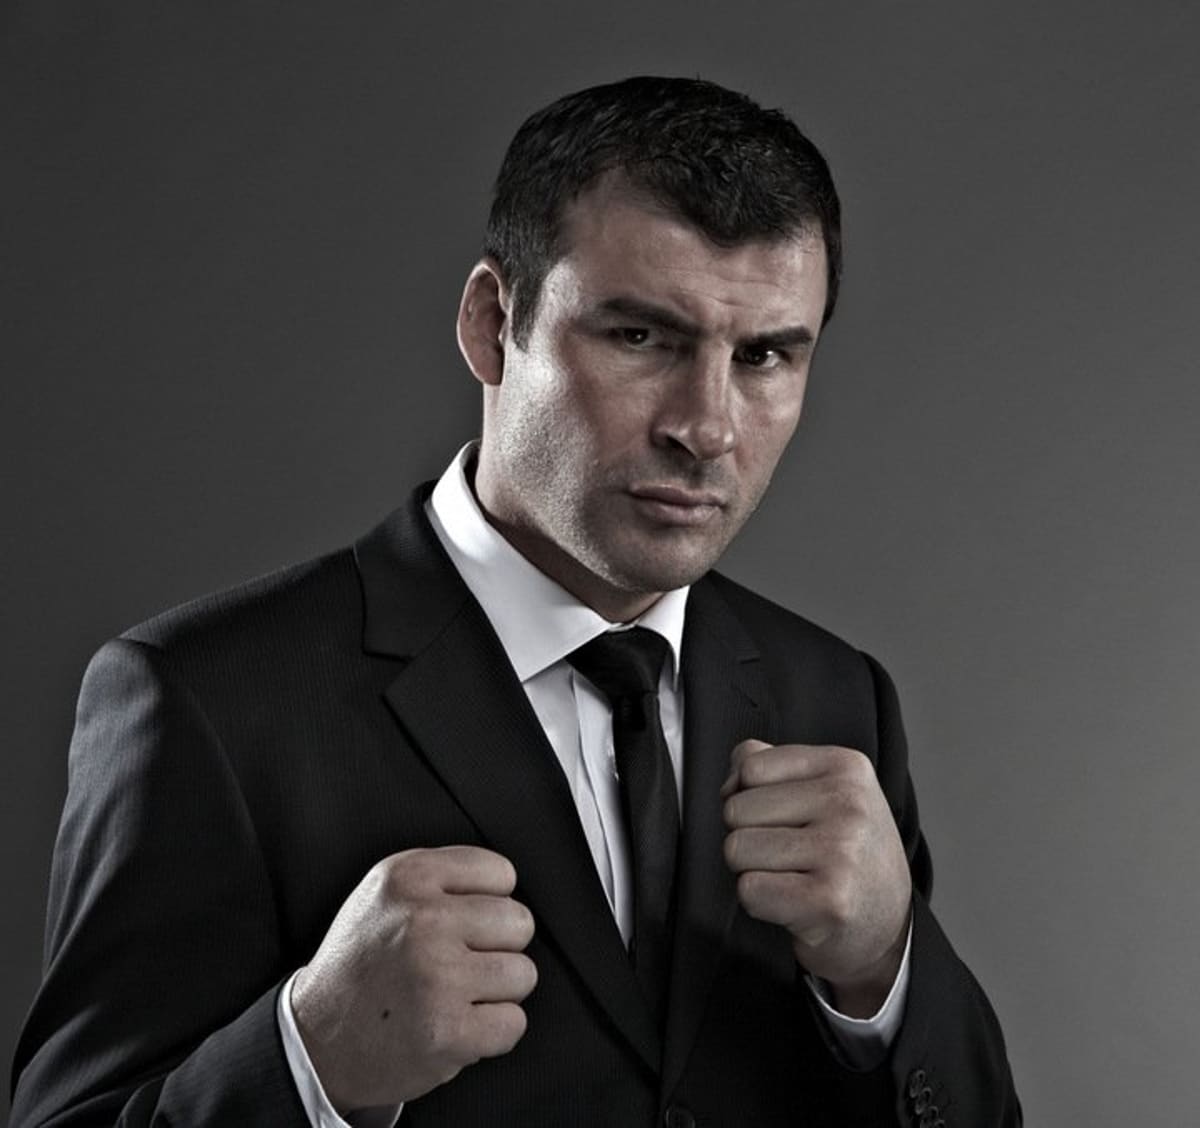 Image: Calzaghe and Lewis Lead Euro, UK, Aussie and Africa!